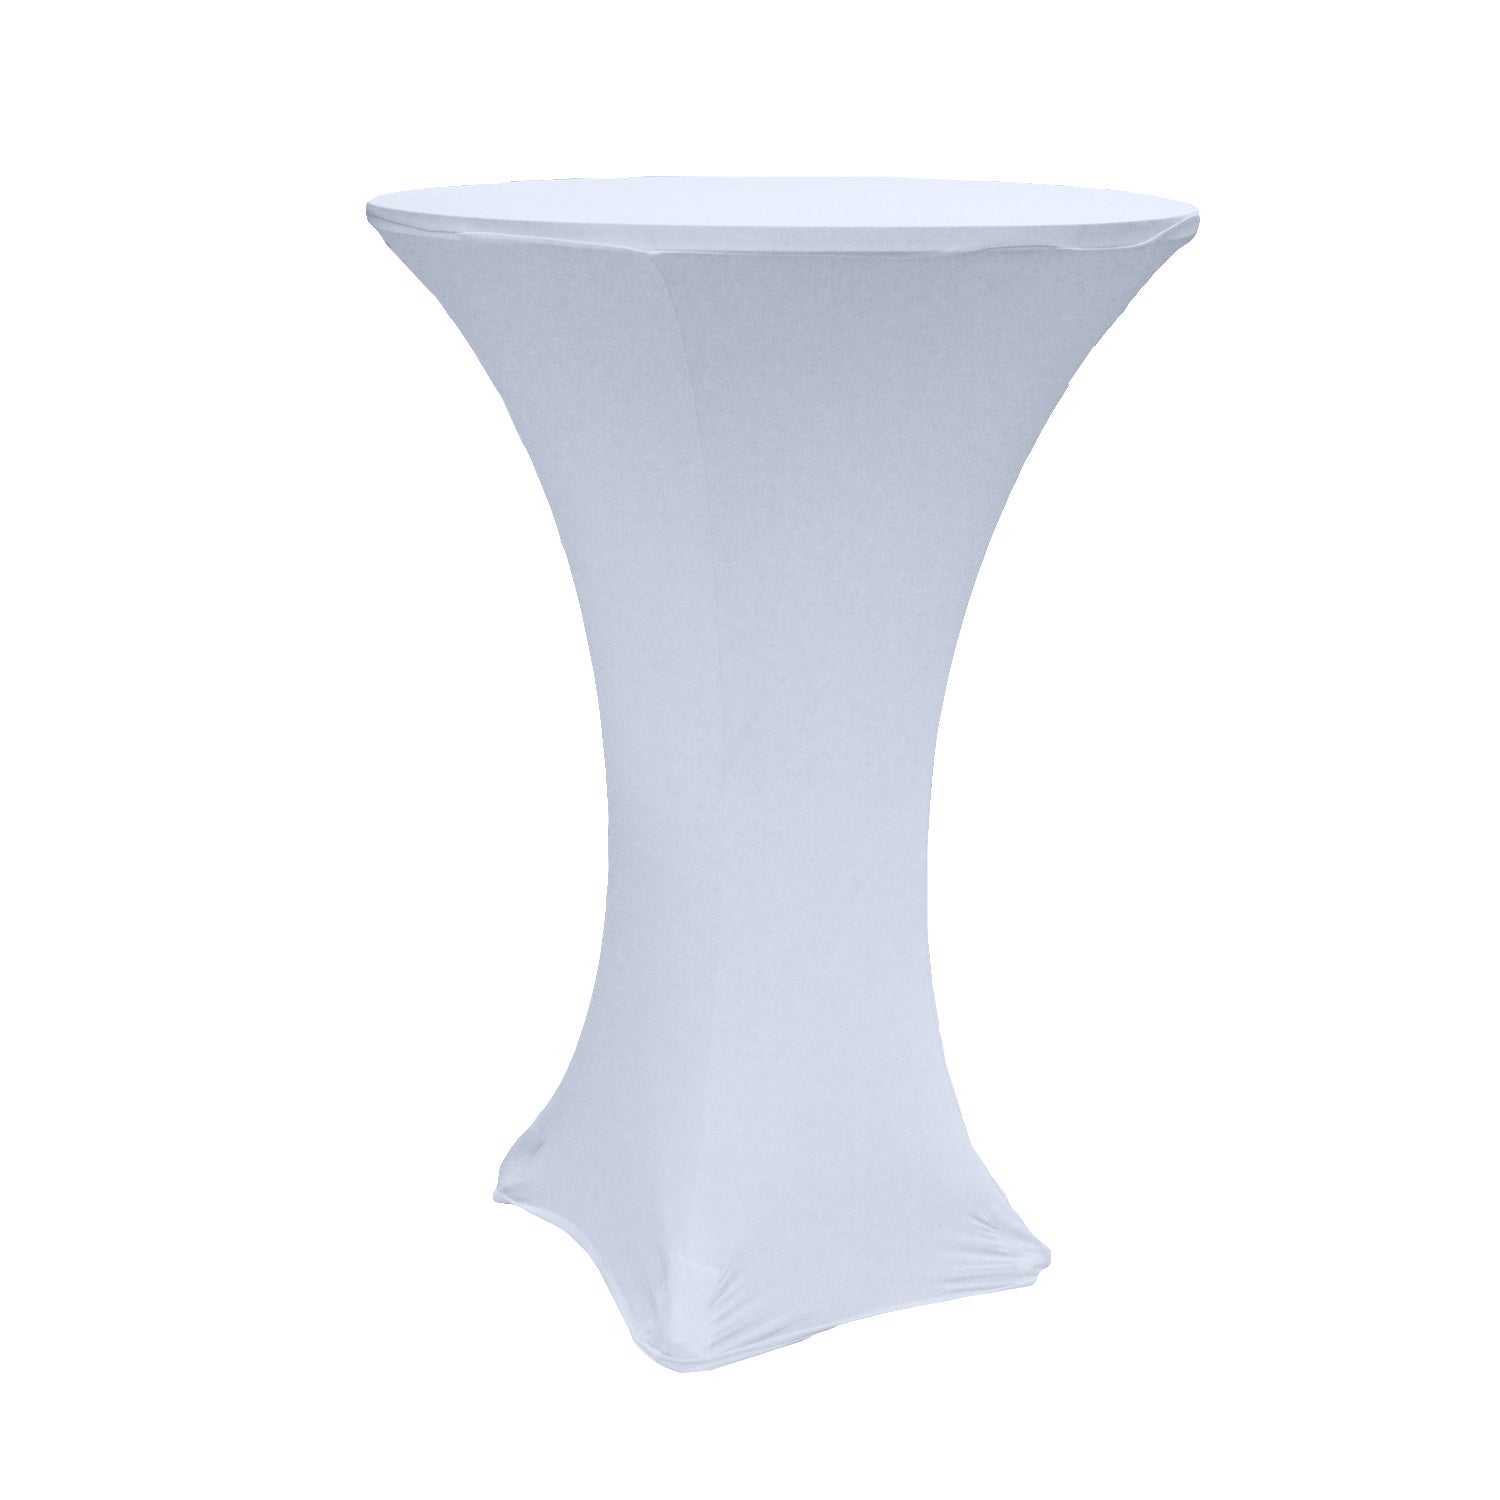 Spandex Cocktail Table Cover 30" Round - Dusty Blue - CV Linens